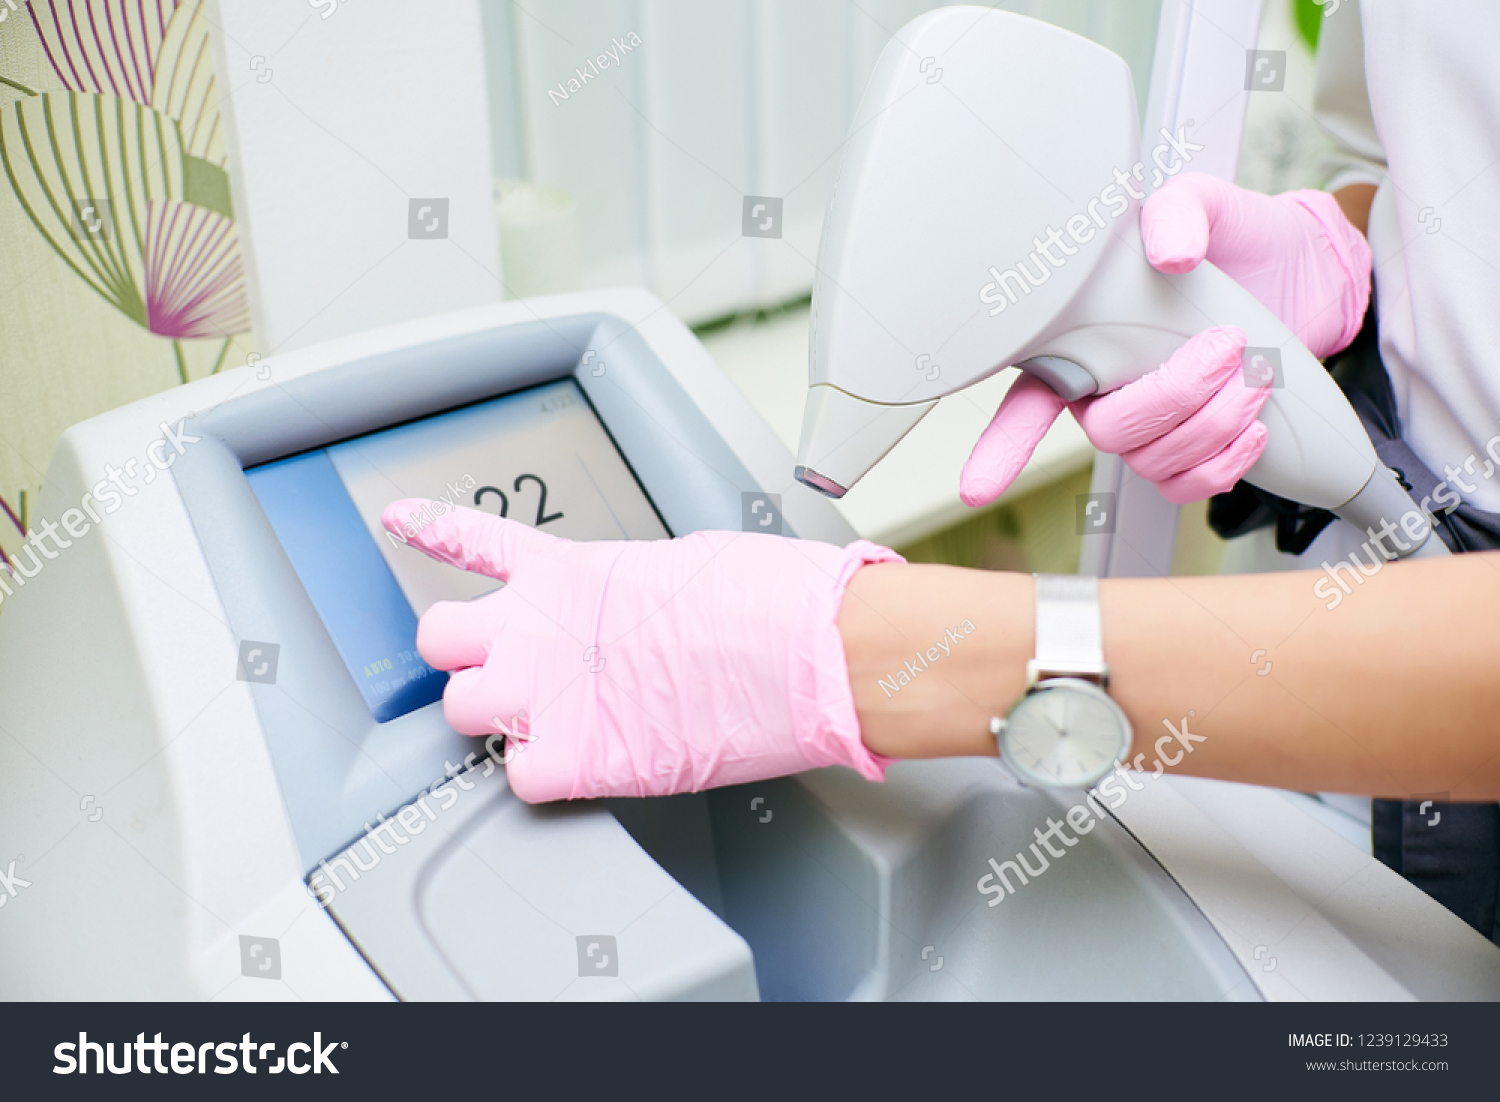 Hands of the doctor in pink gloves hold the device for an epilation and press the touch screen. The concept of control device, laser hair removal #1239129433